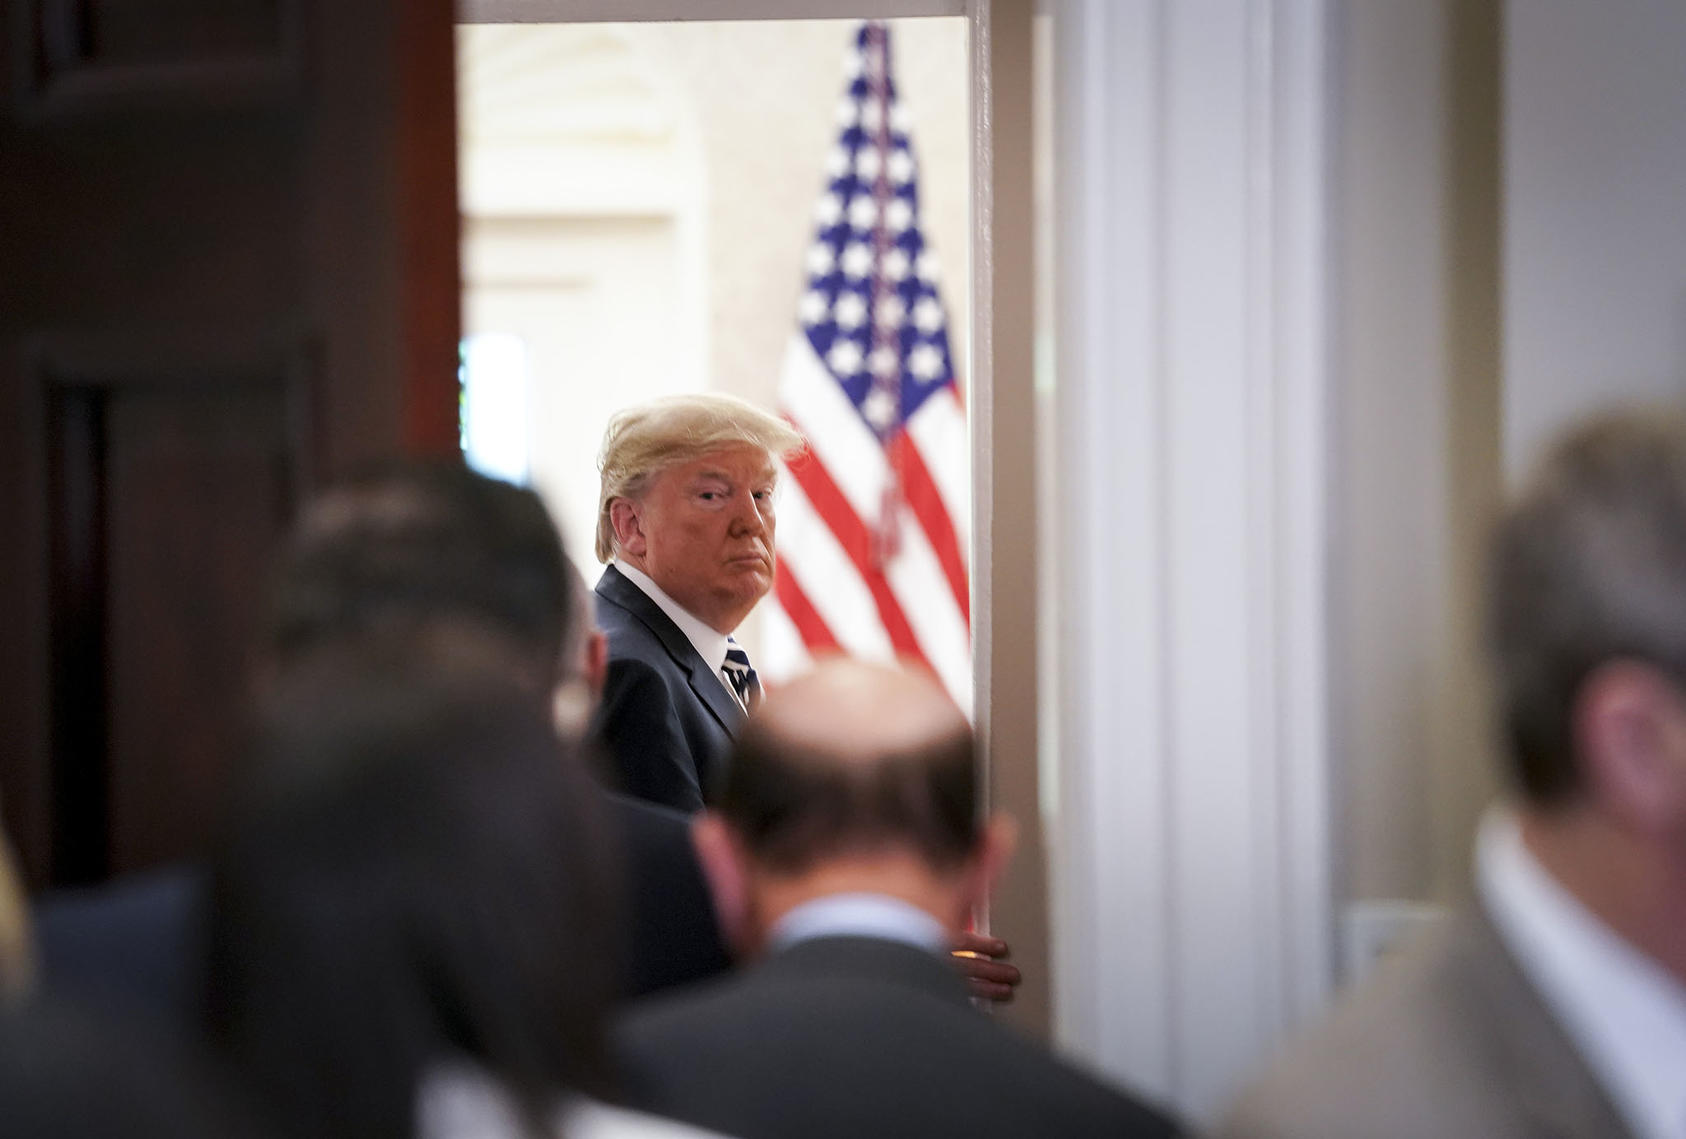 President Donald Trump walks back into the Oval Office after remarking on the cancellation of the North Korea summit. (Doug Mills/The New York Times) 